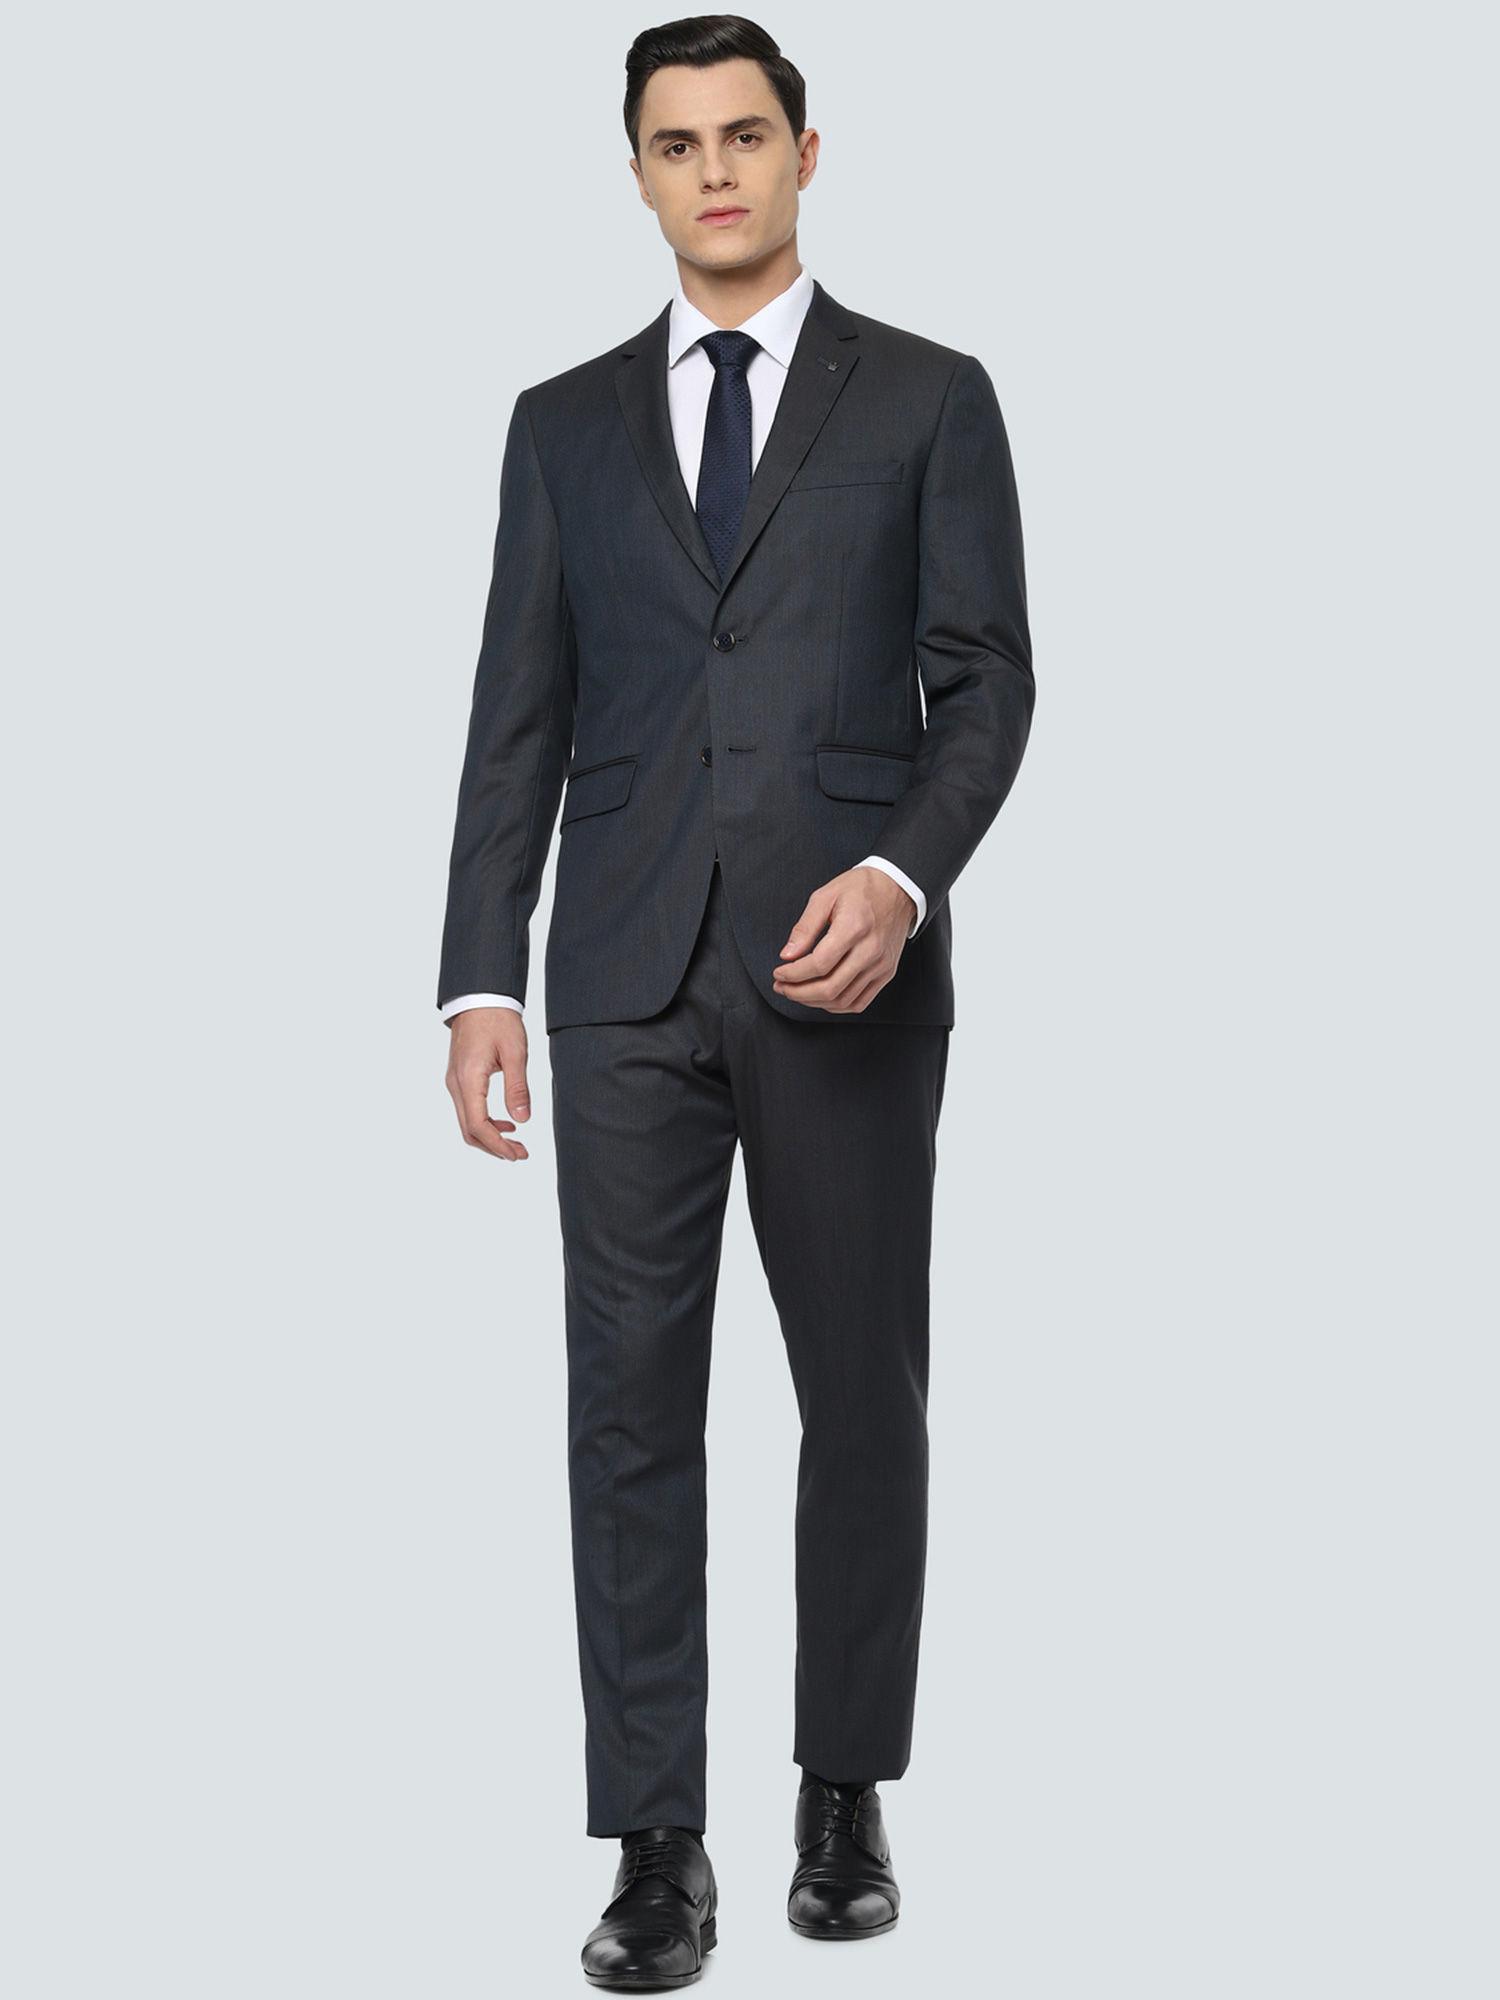 grey two piece suit (set of 2)